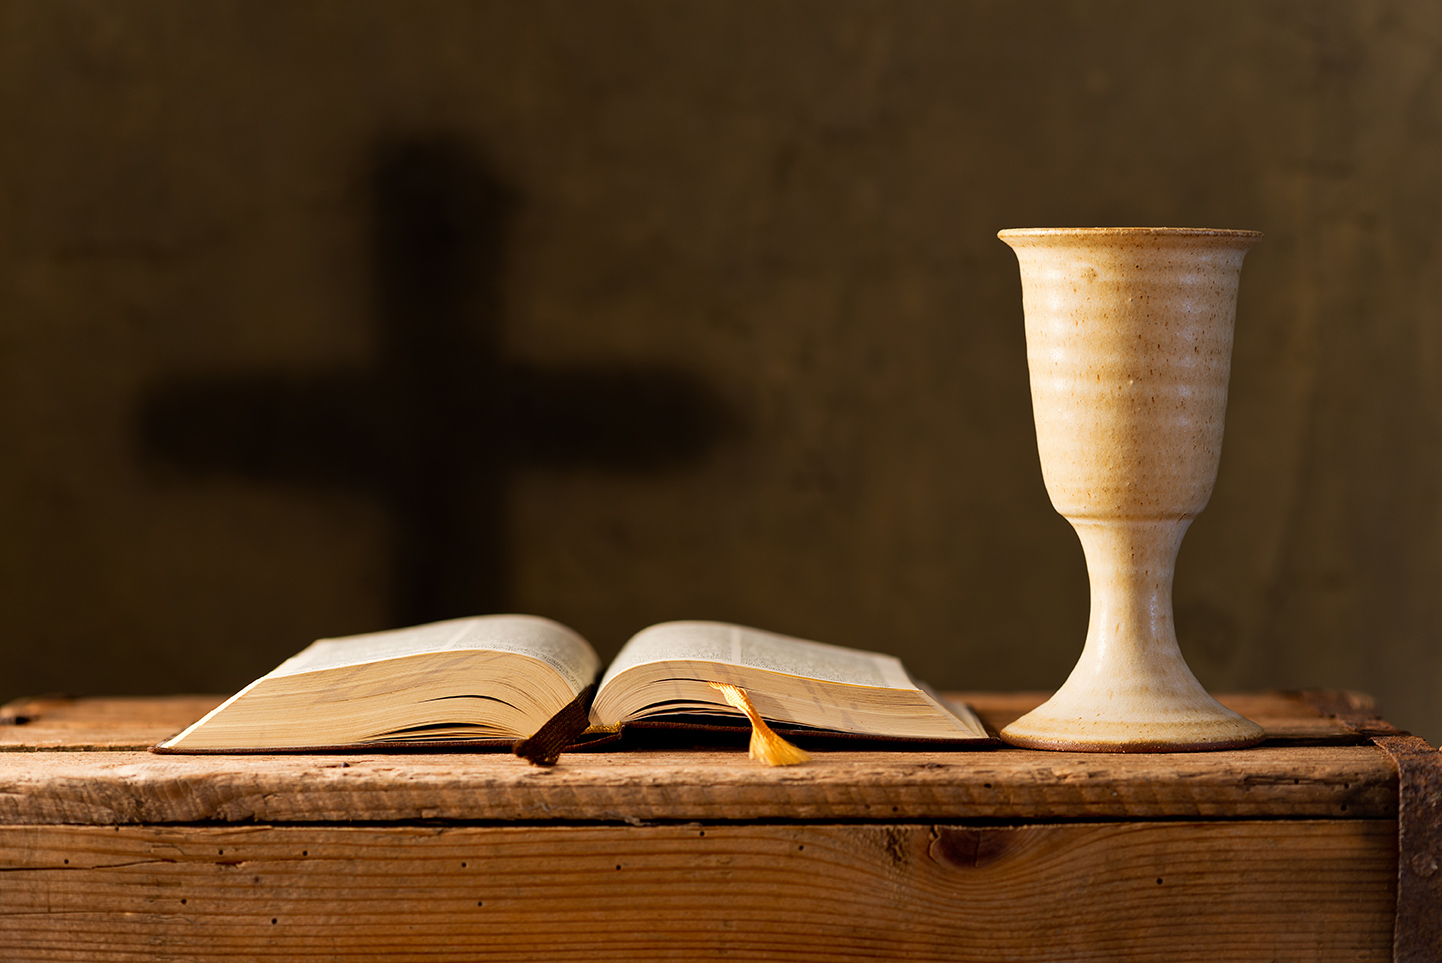 Communion cup and open bible on a rustic wooden table